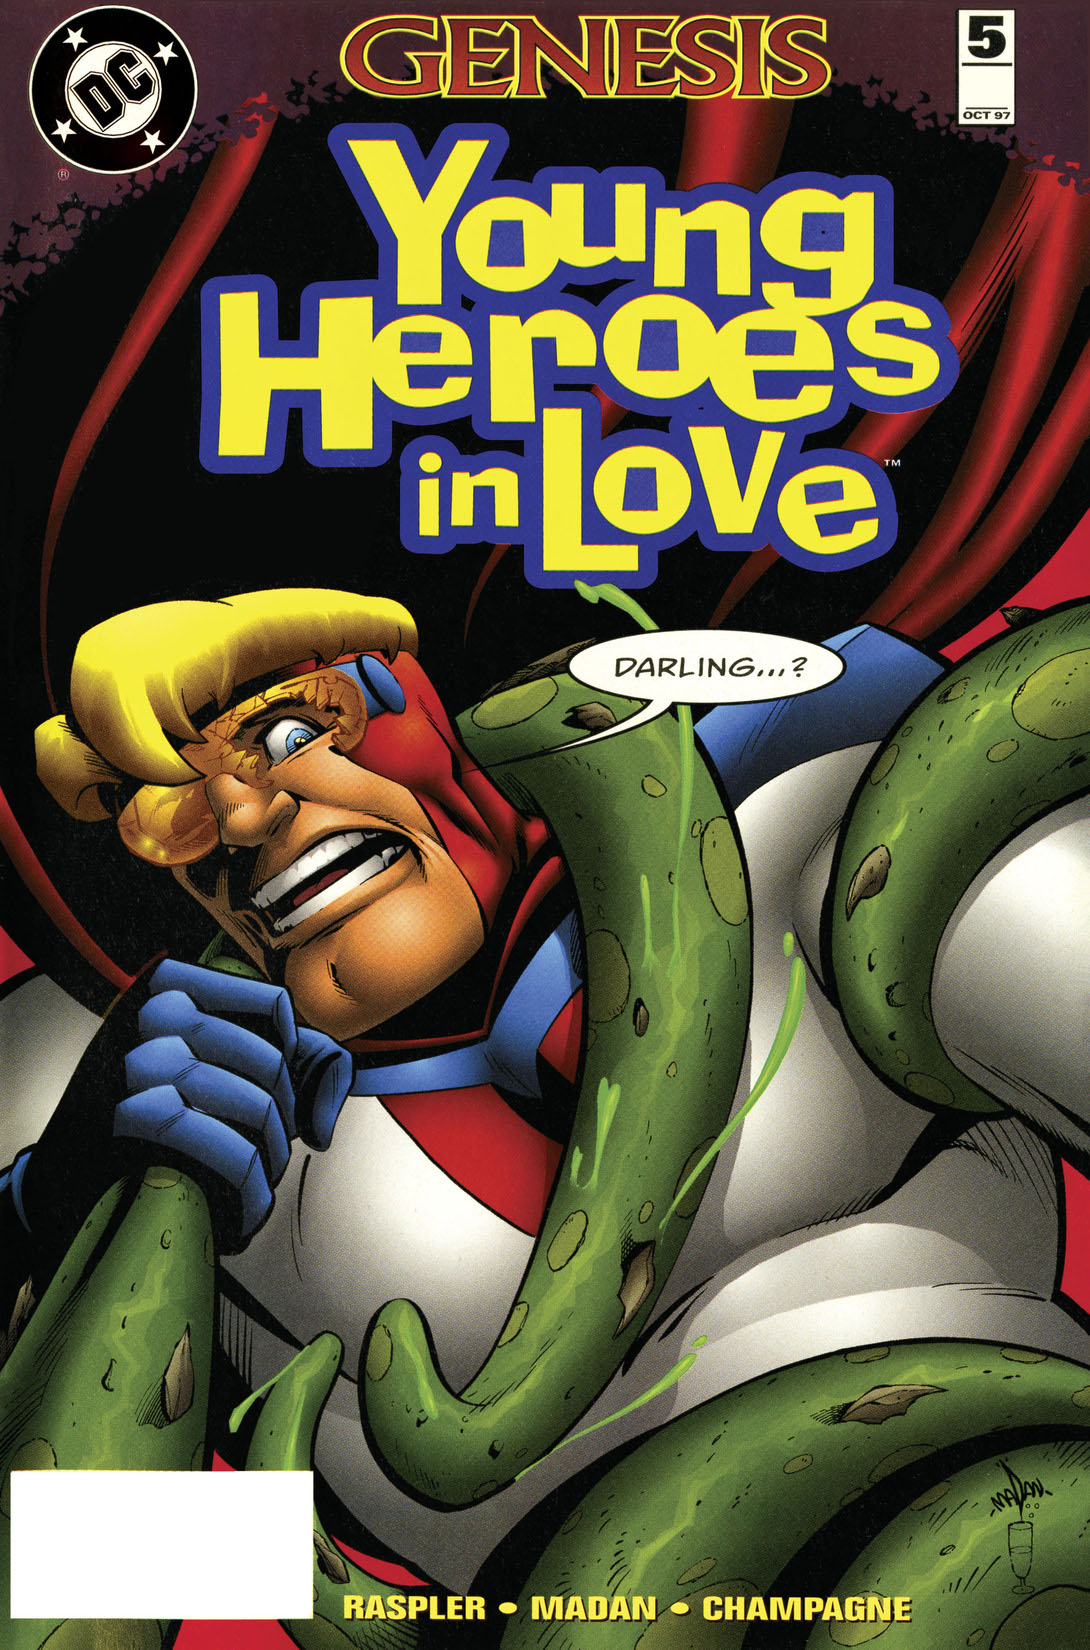 Young Heroes in Love #5 preview images